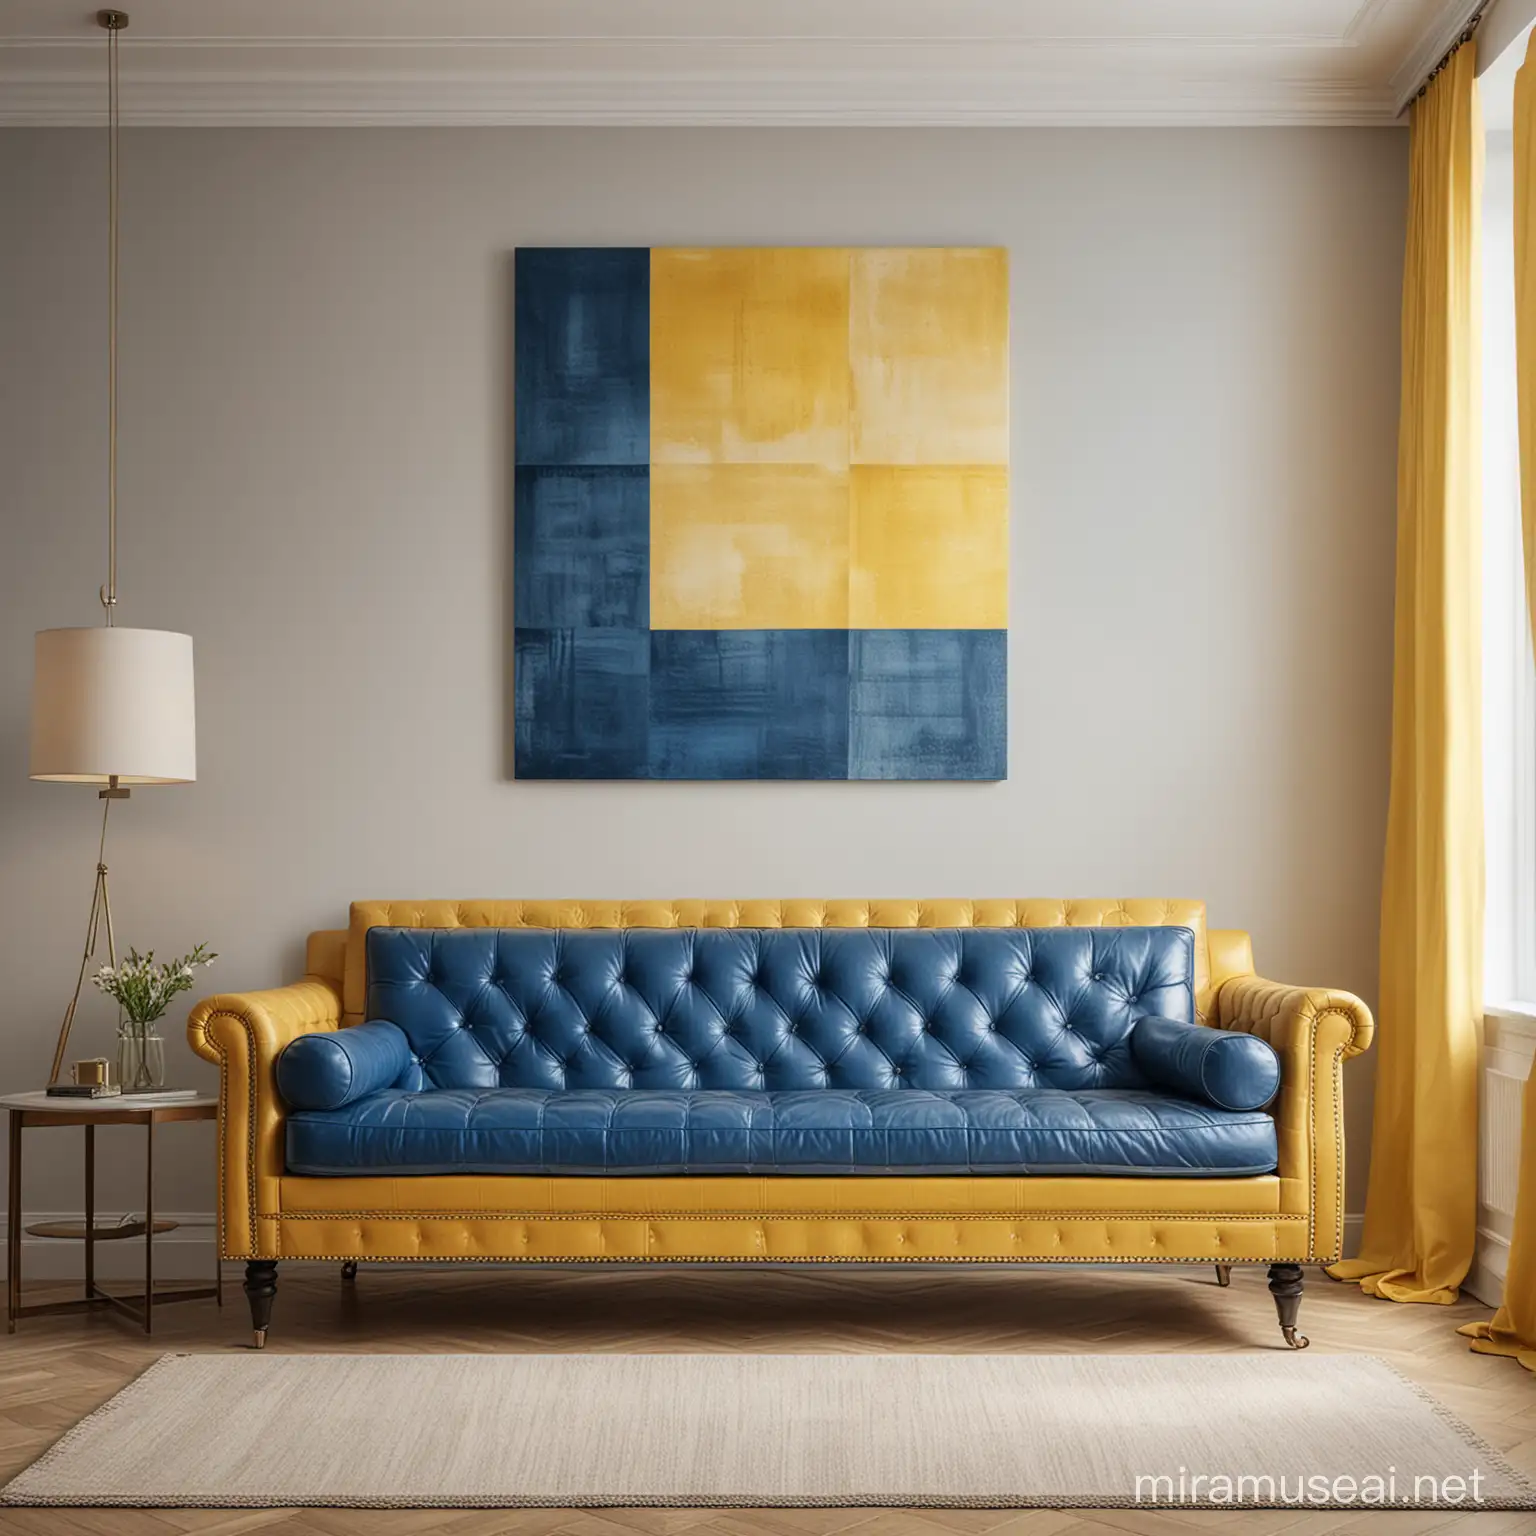 A living room with blue leather sofa, yellow, beige a square picture hangs behind it on the wall, detailed, vivid, light and shadow